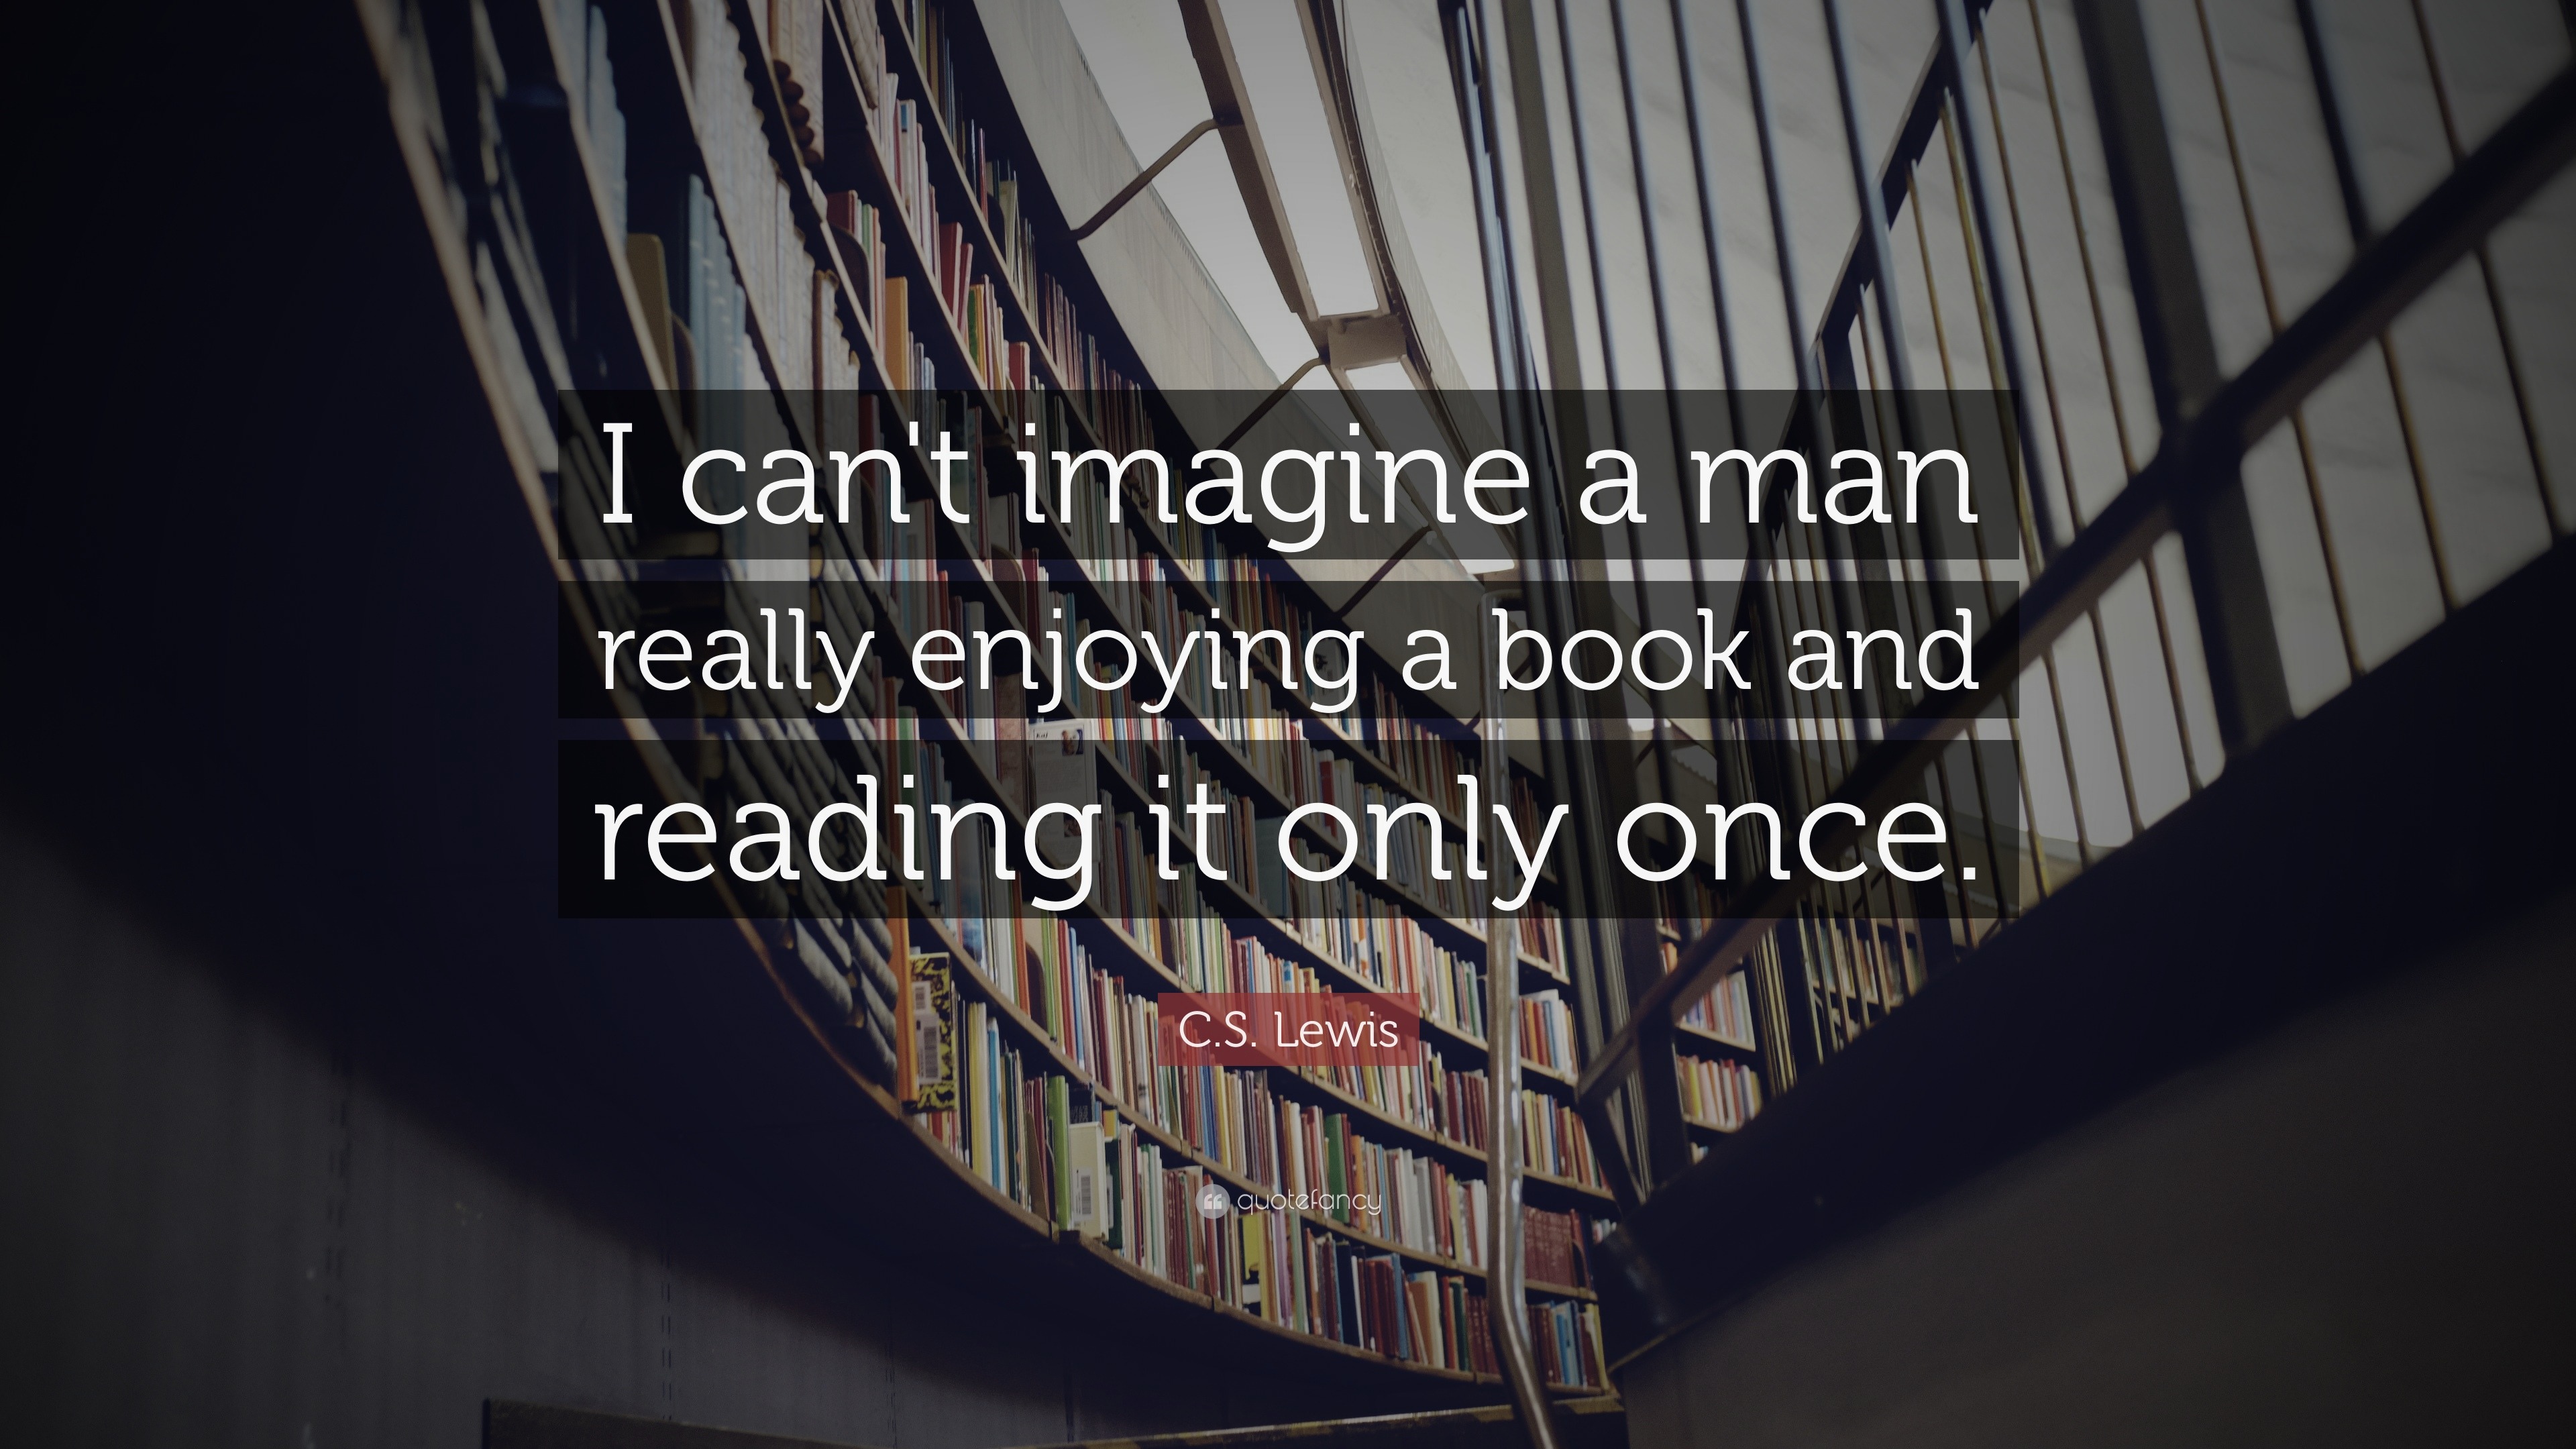 Quotes About Books And Reading (22 wallpapers) - Quotefancy